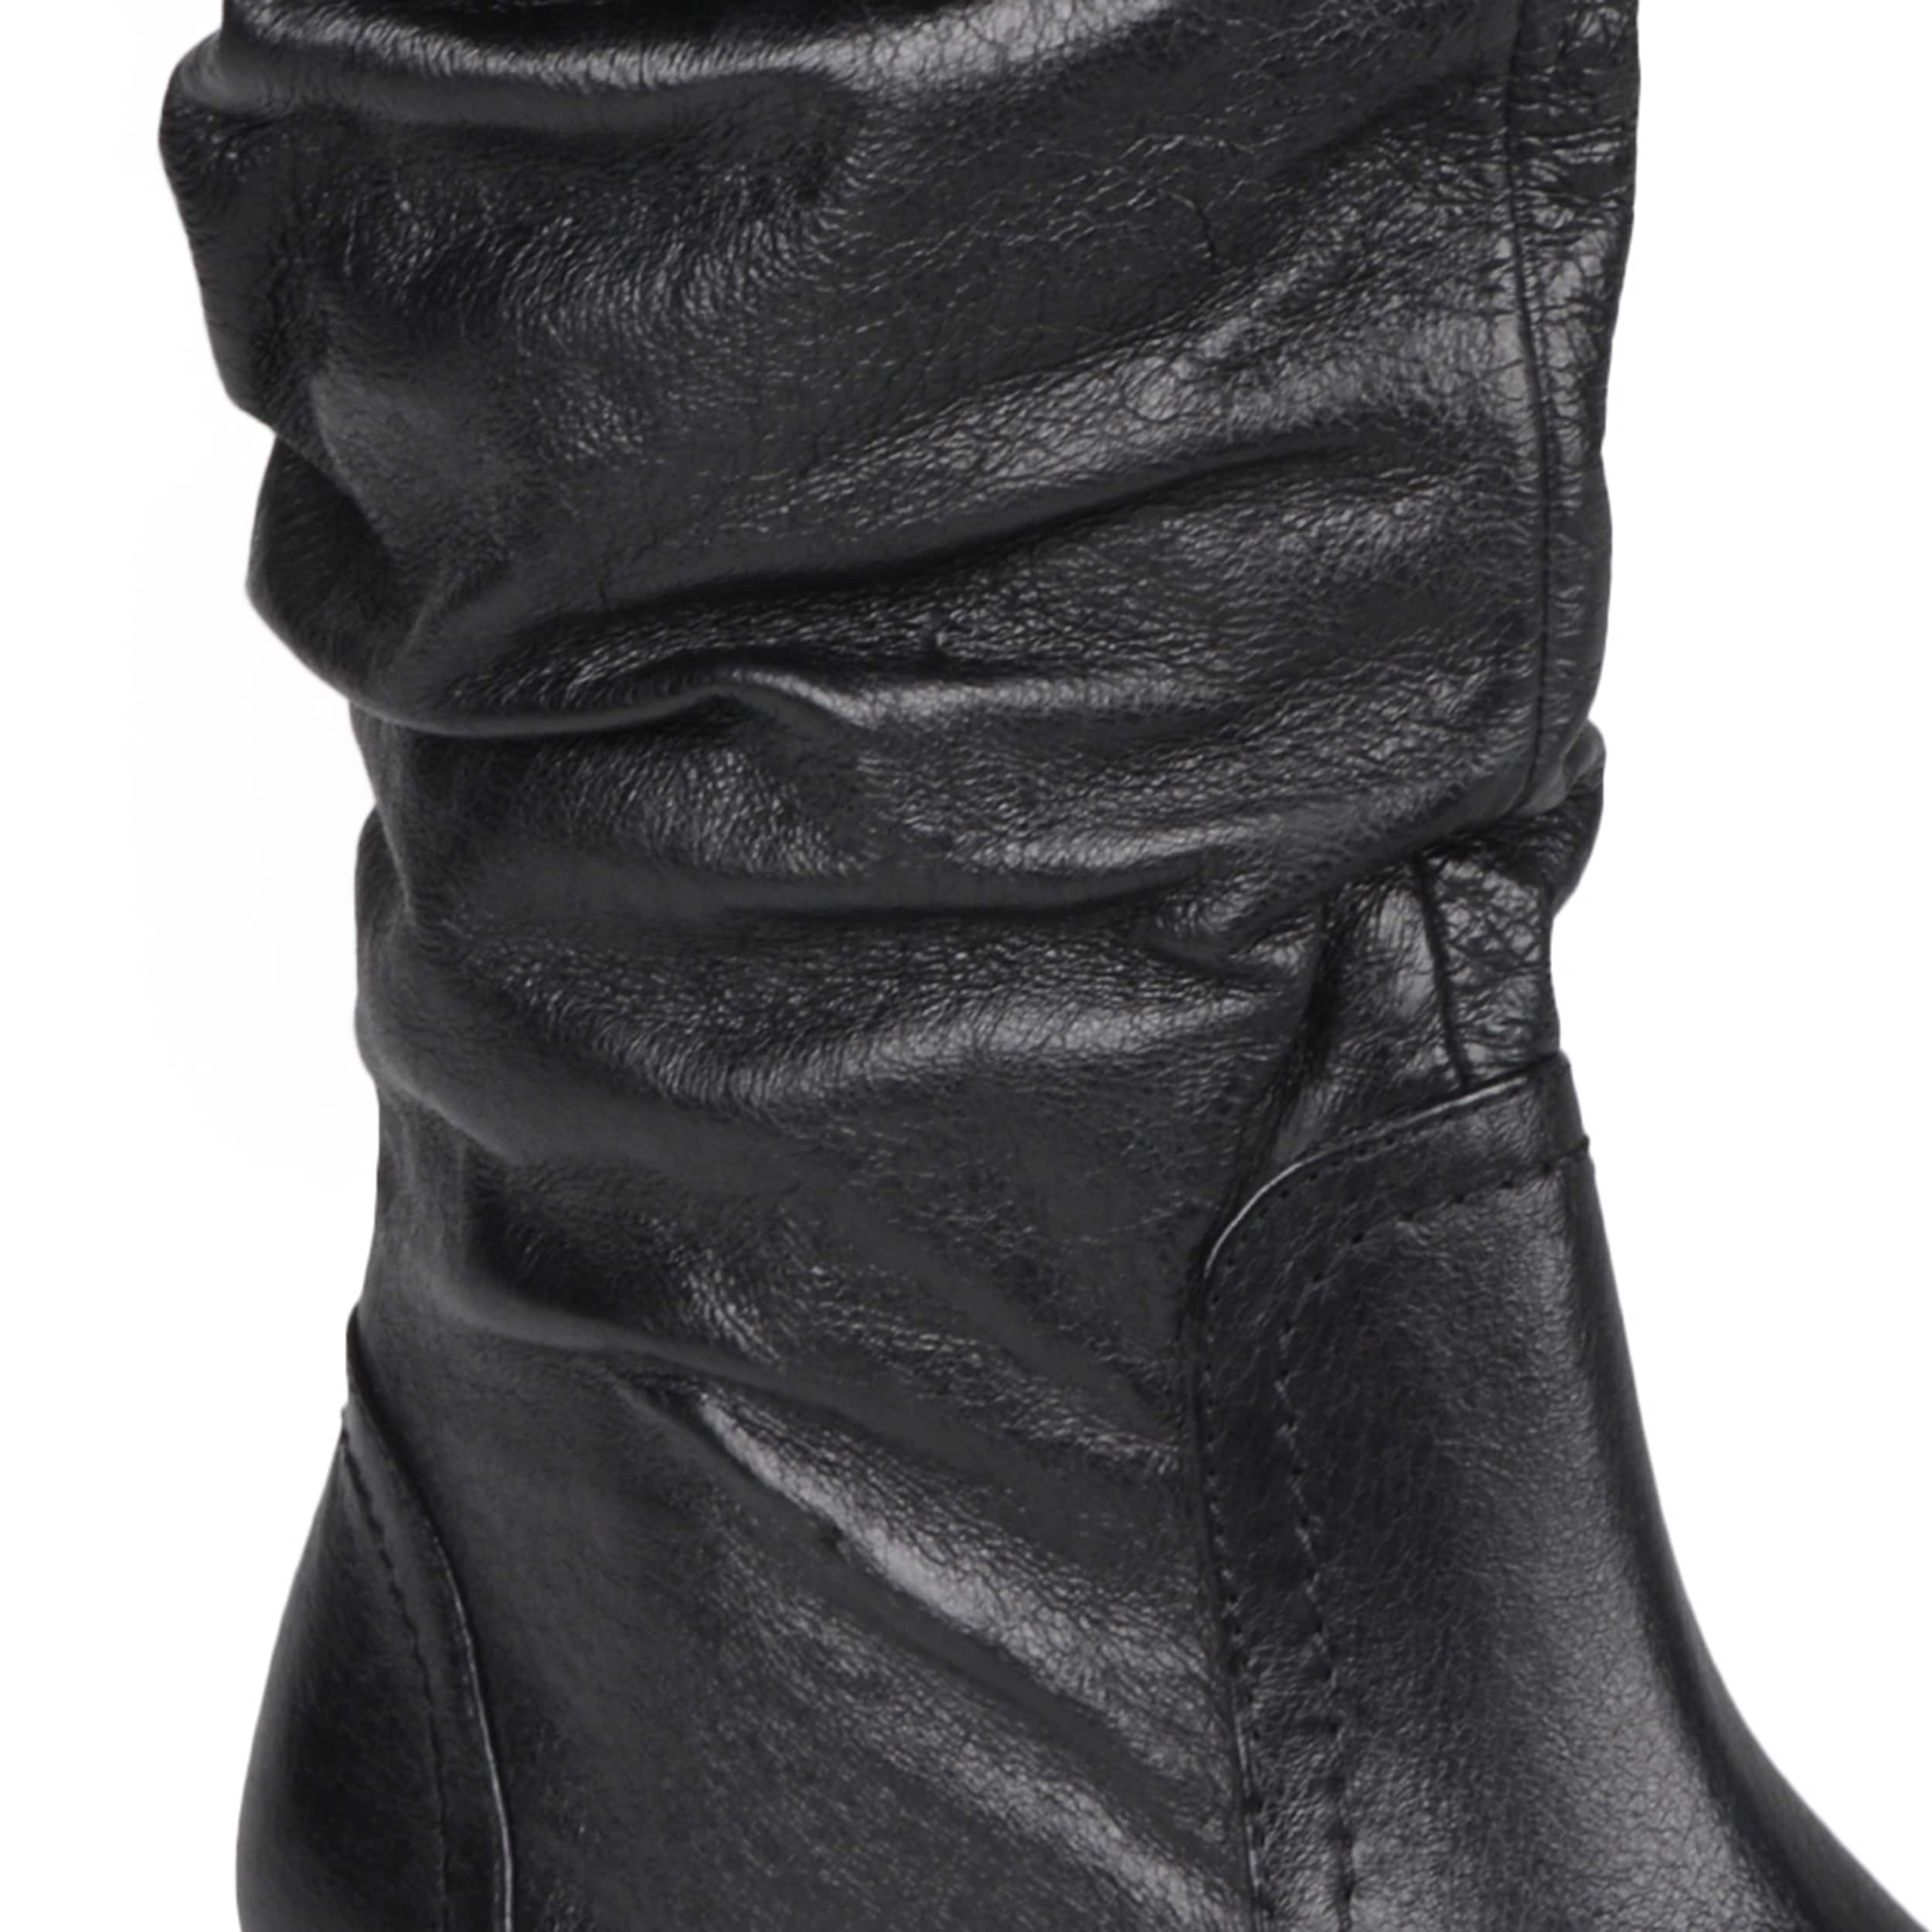 leather scrunch boots